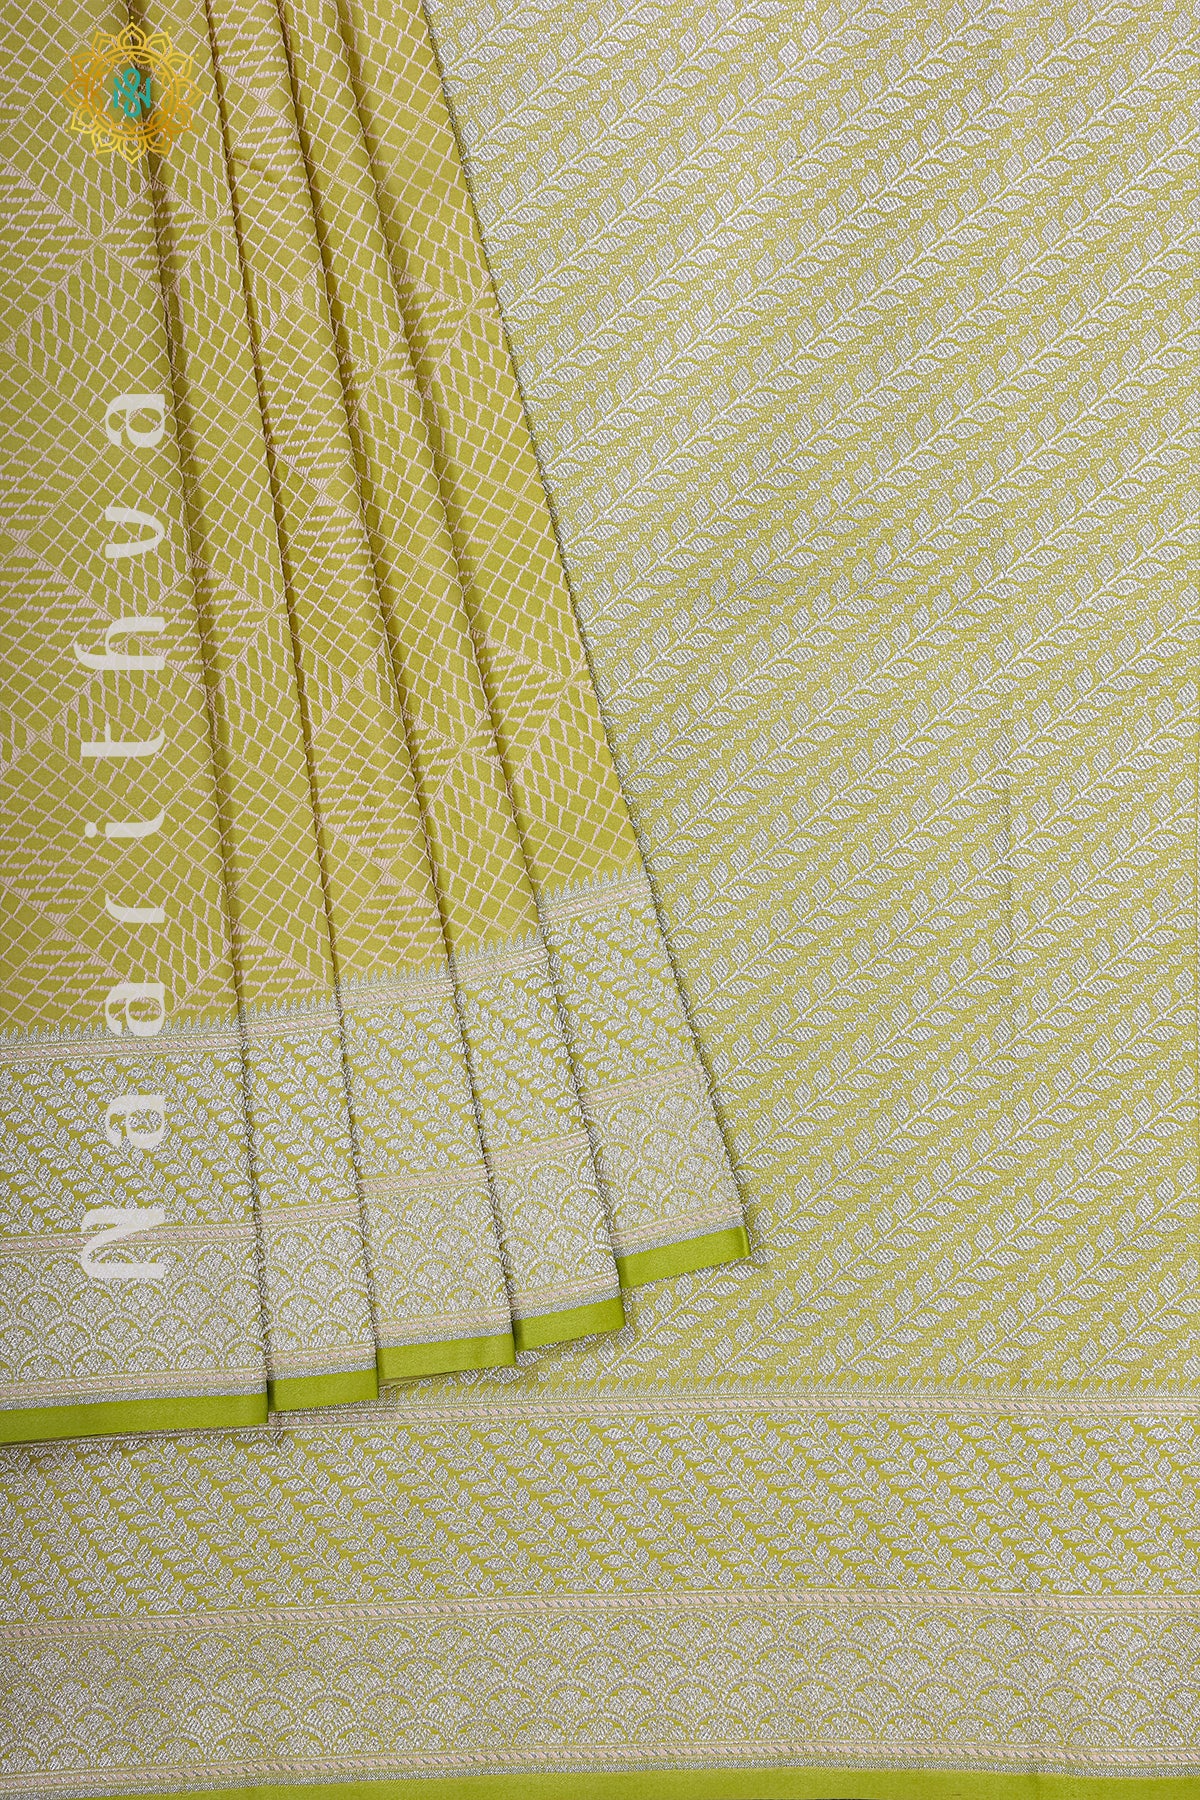 LIME GREEN - SATIN SILK WITH TANCHOI WEAVING